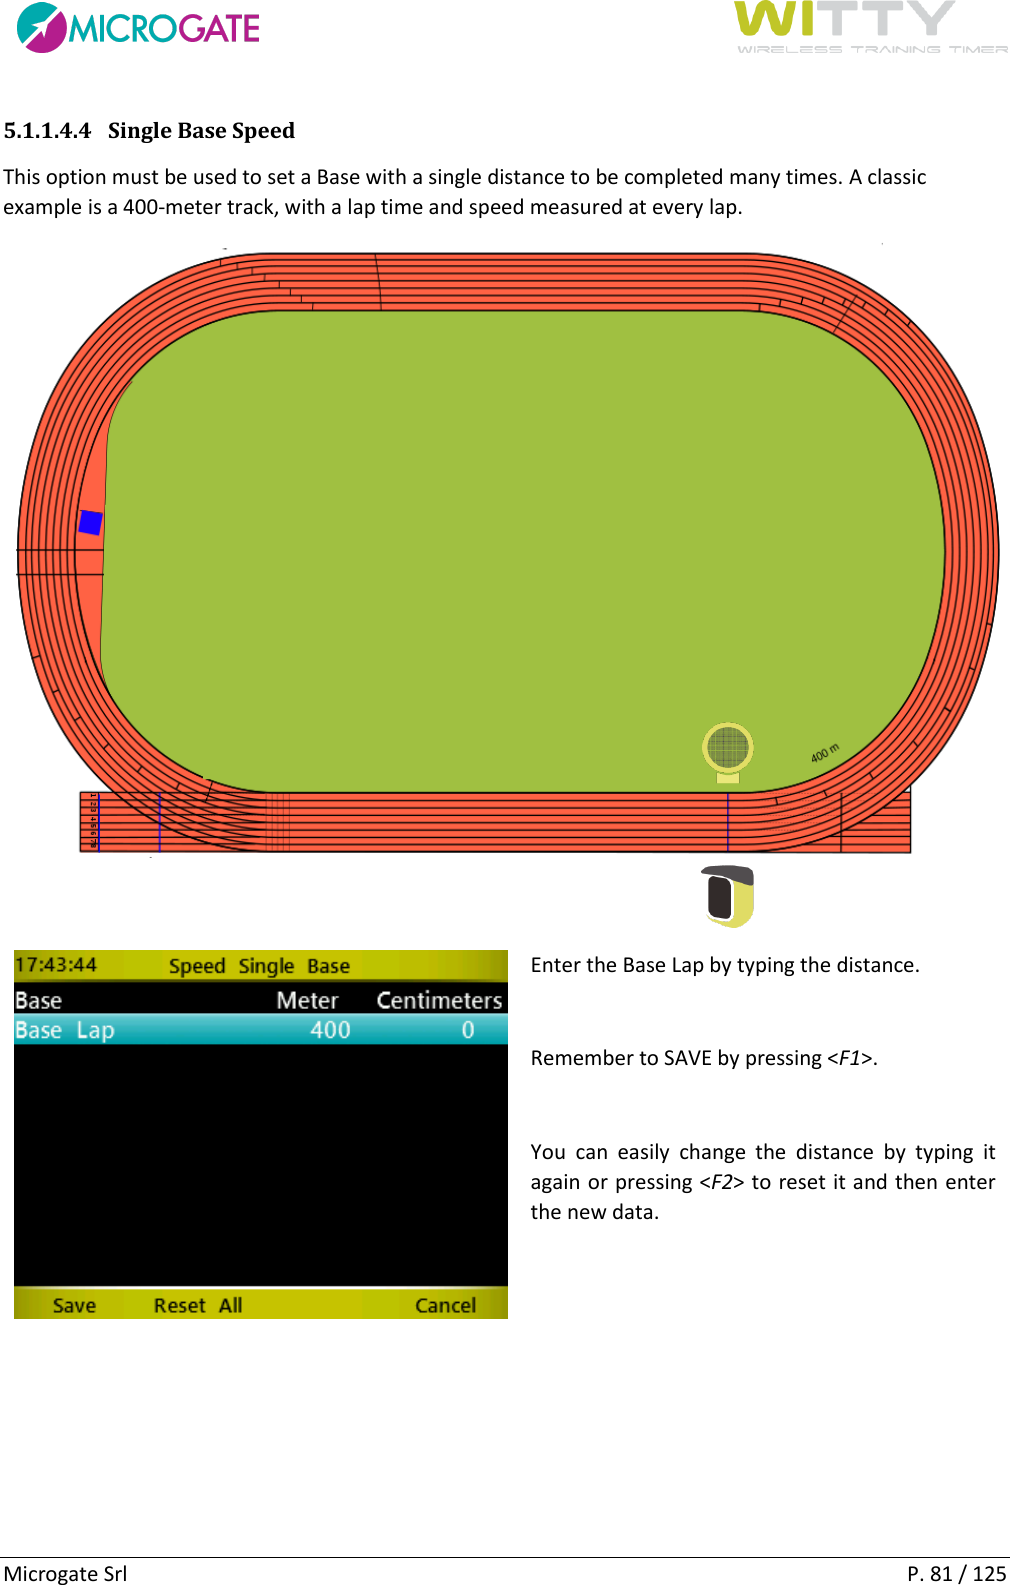      Microgate Srl    P. 81 / 125 5.1.1.4.4 Single Base Speed This option must be used to set a Base with a single distance to be completed many times. A classic example is a 400-meter track, with a lap time and speed measured at every lap.    Enter the Base Lap by typing the distance.  Remember to SAVE by pressing &lt;F1&gt;.  You  can  easily  change  the  distance  by  typing  it again or pressing &lt;F2&gt; to reset it and then enter the new data.     